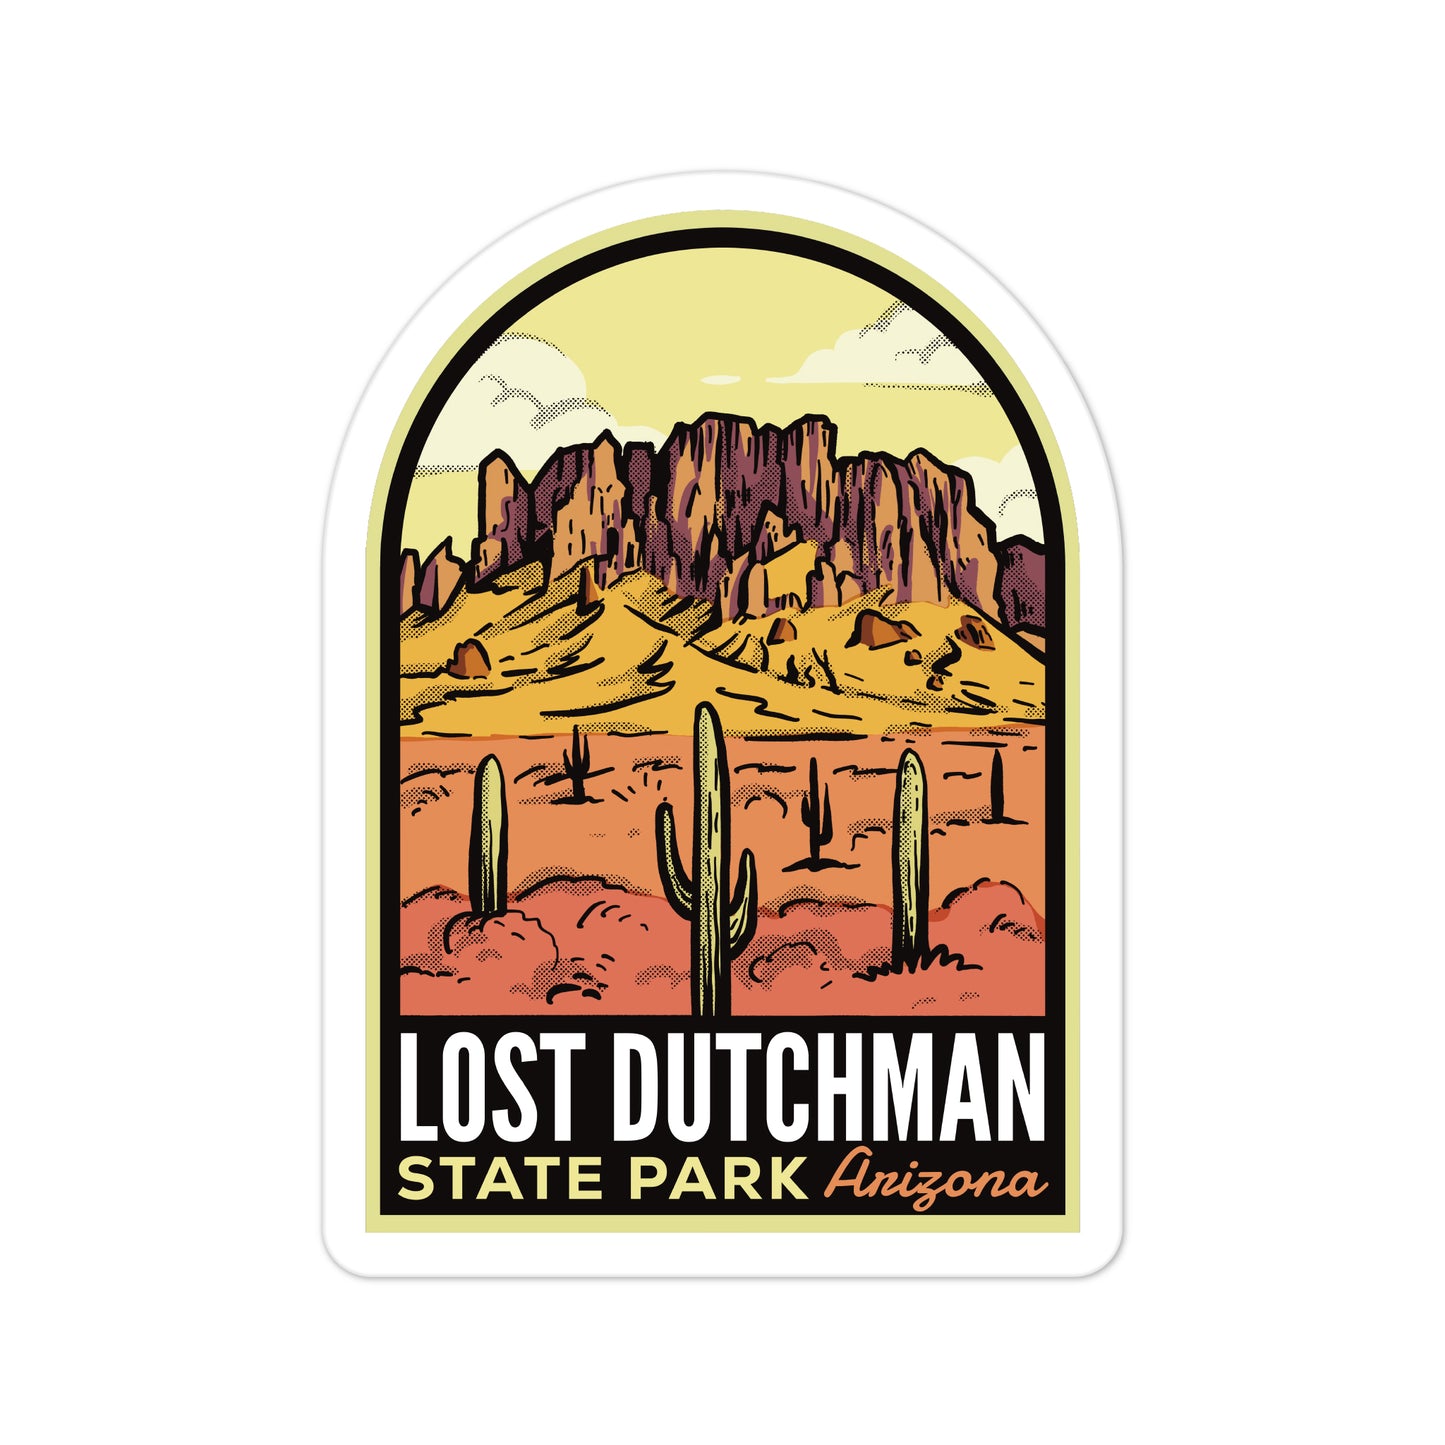 A sticker of Lost Dutchman State Park